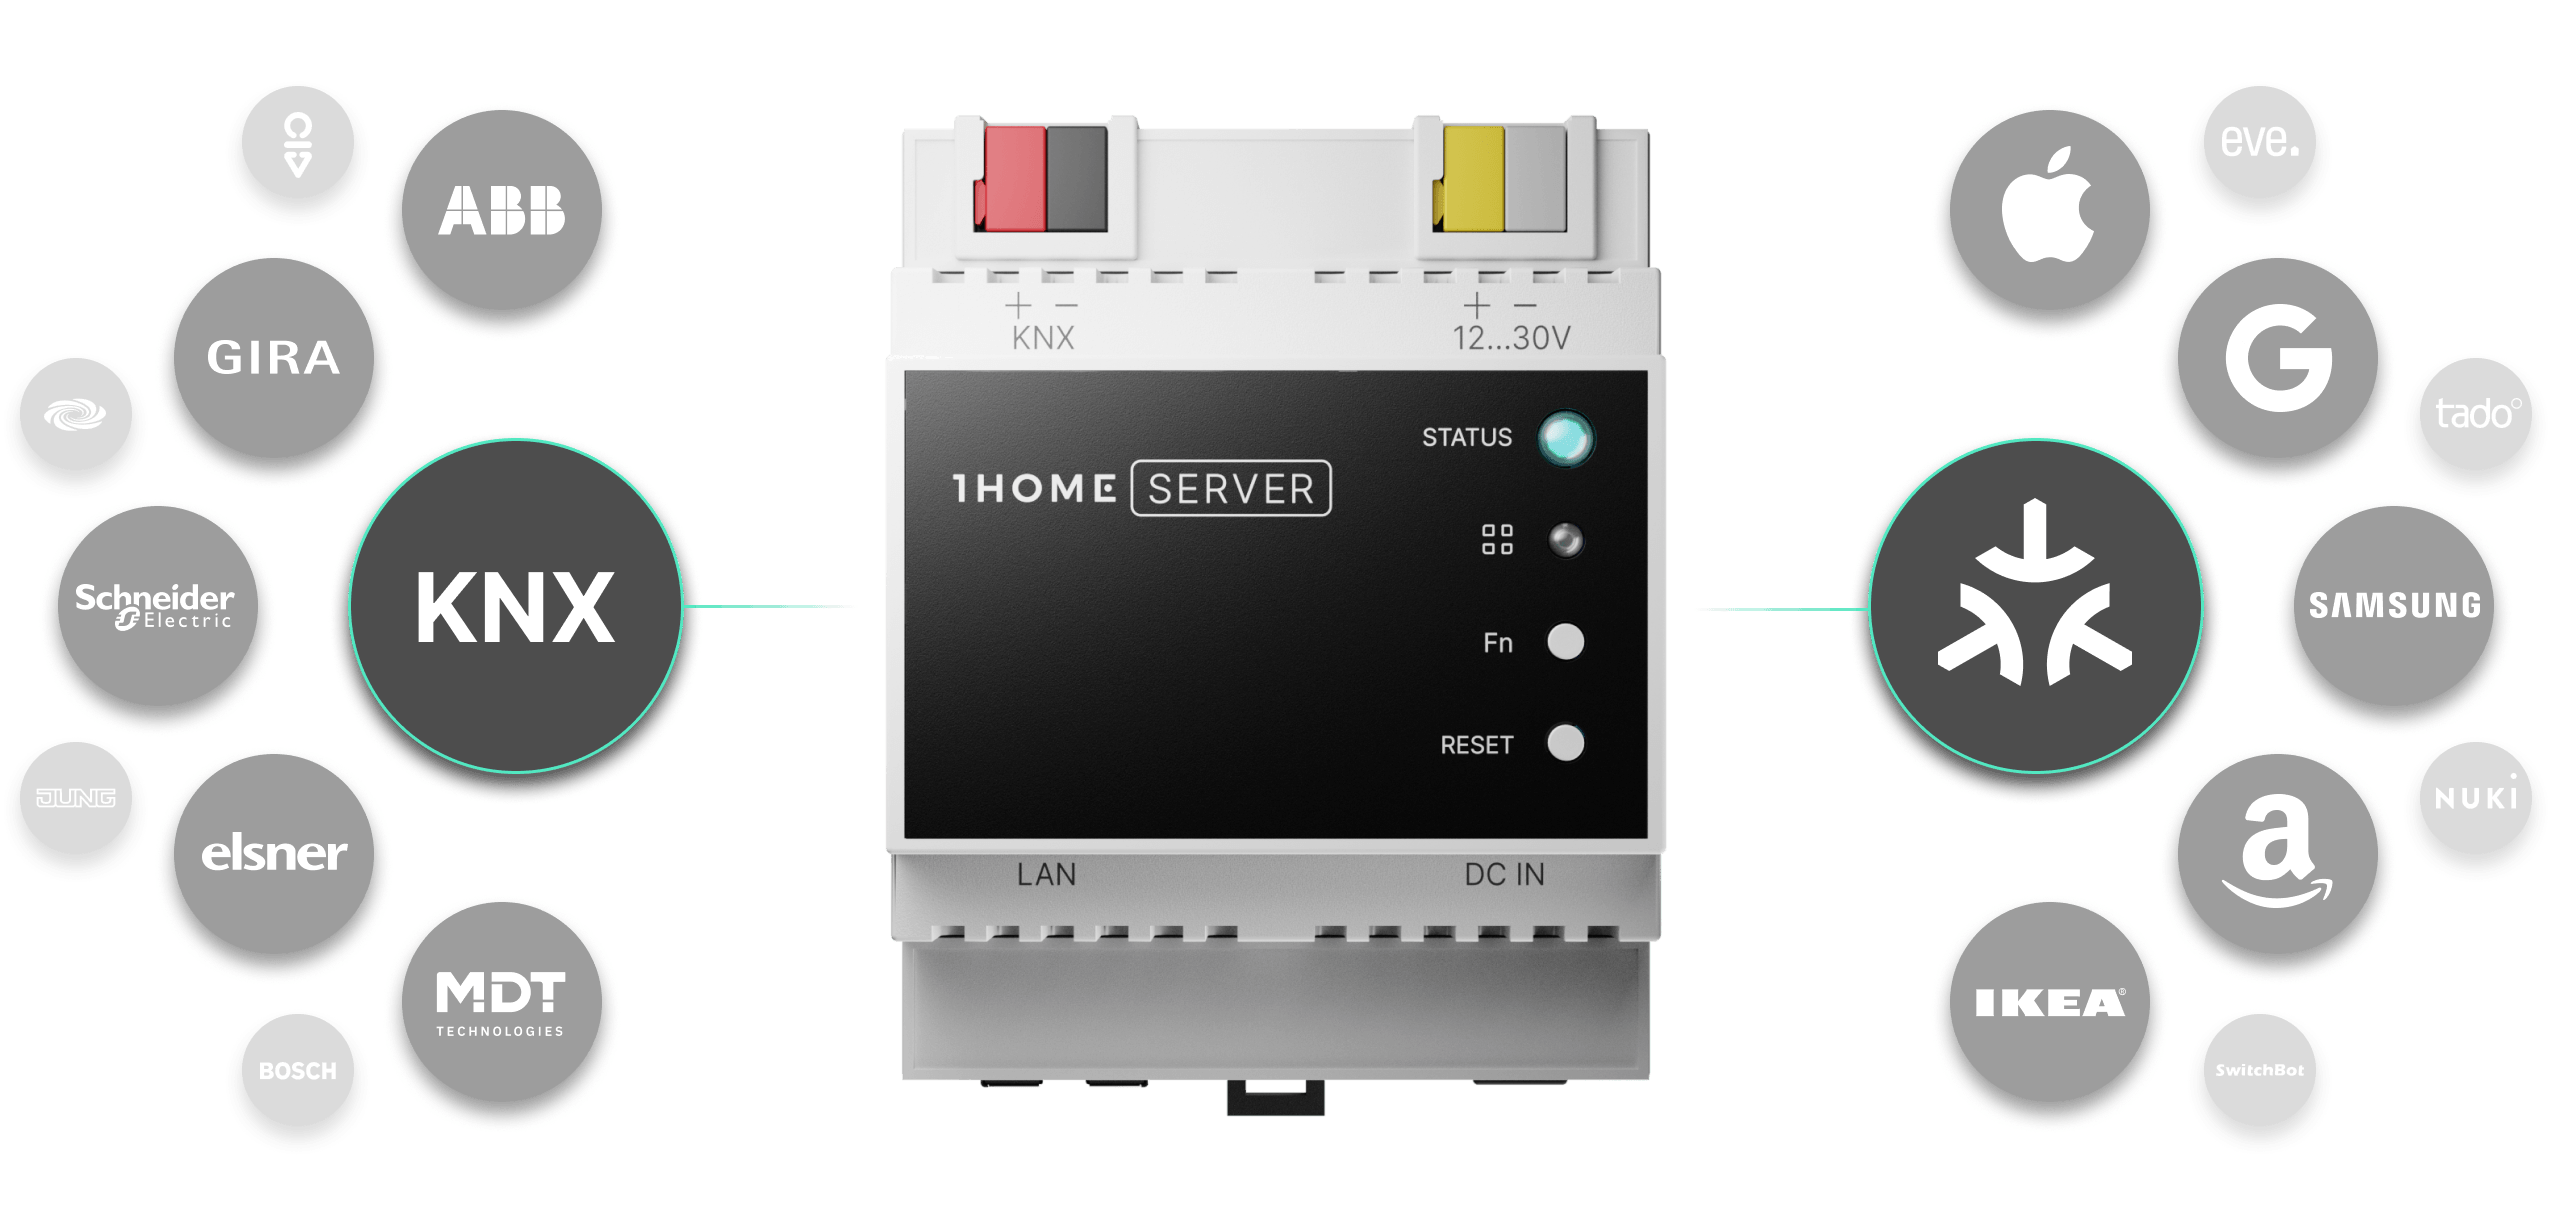 1Home device to control KNX & Matter